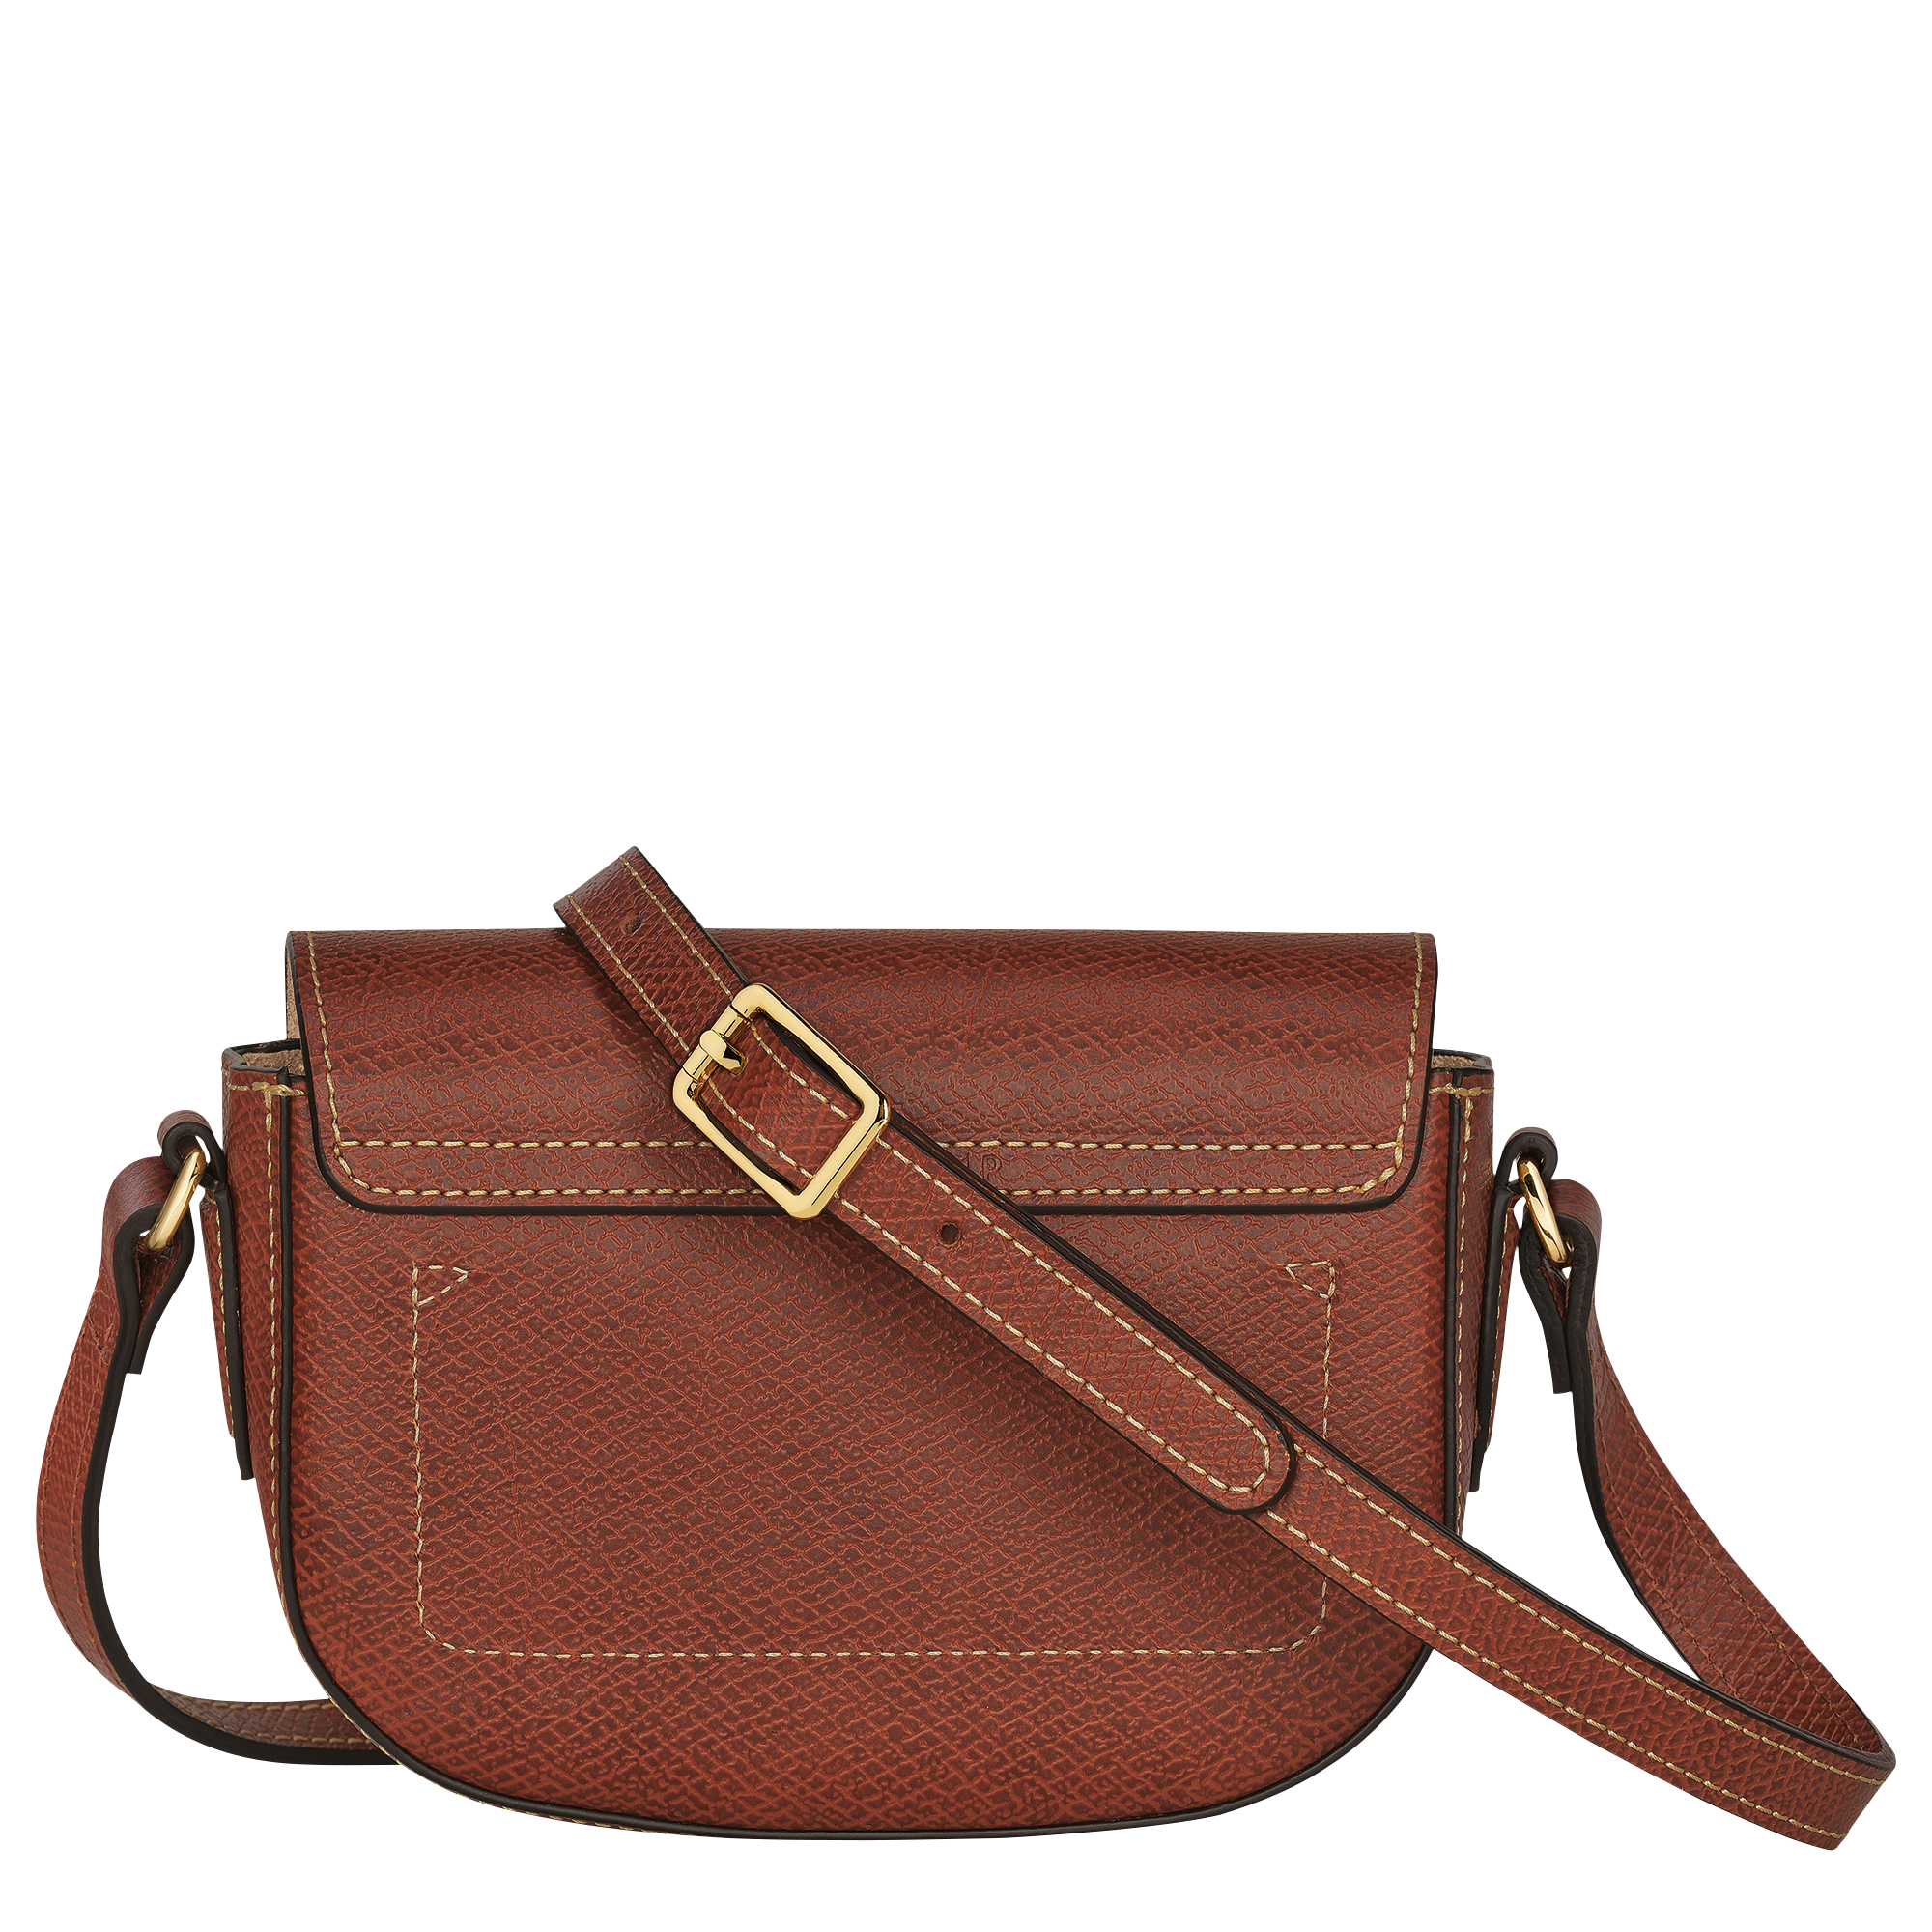 Mast Harbour Hand Bags Price in India | Hand Bags Price List in India -  DTashion.com